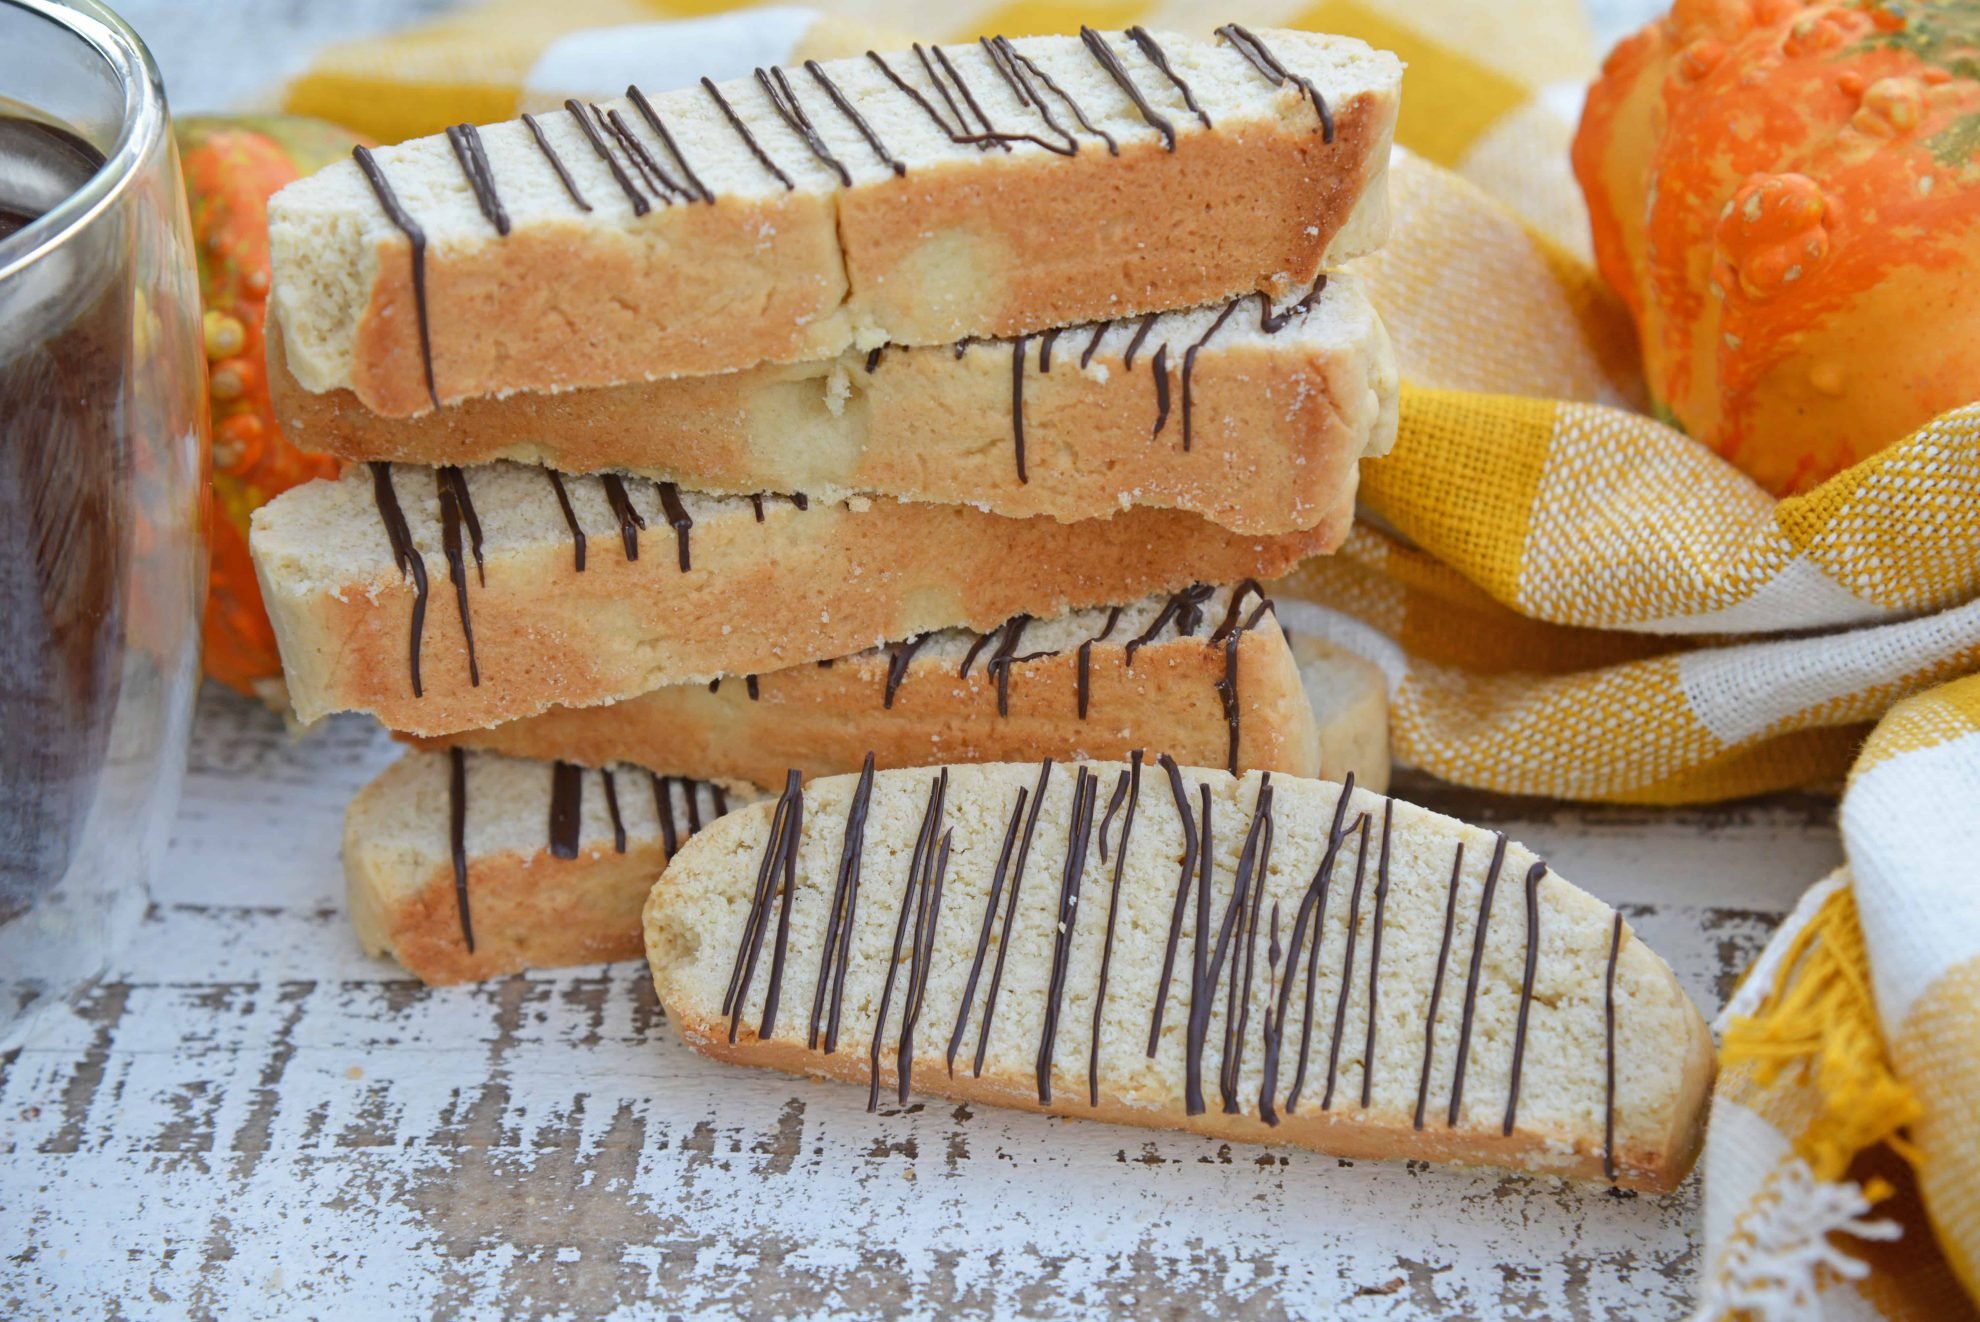 Vanilla Mocha Biscotti are easy to make and perfect for pairing with coffee or tea. Subtle coffee, vanilla and chocolate flavors make them suitable for any occasion. #homemadebiscotti #biscottirecipe www.savoryexperiments.com